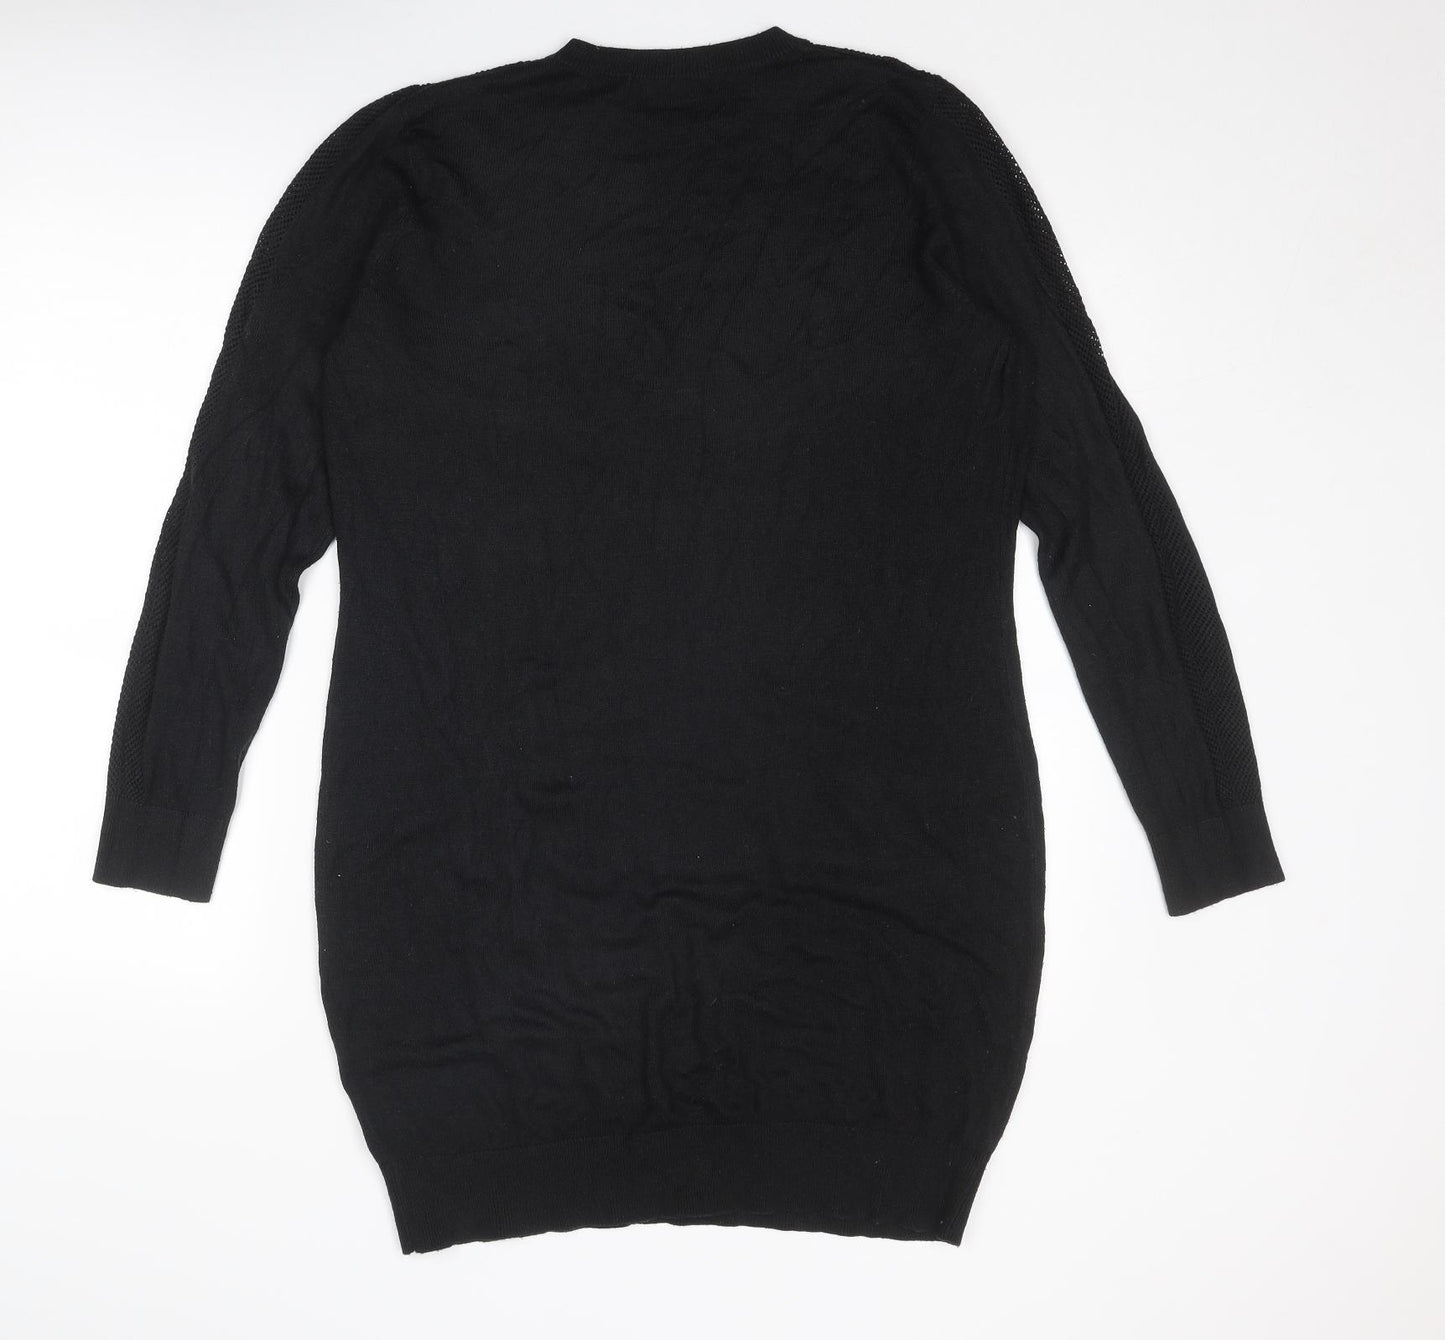 Very Womens Black Round Neck Acrylic Pullover Jumper Size 18